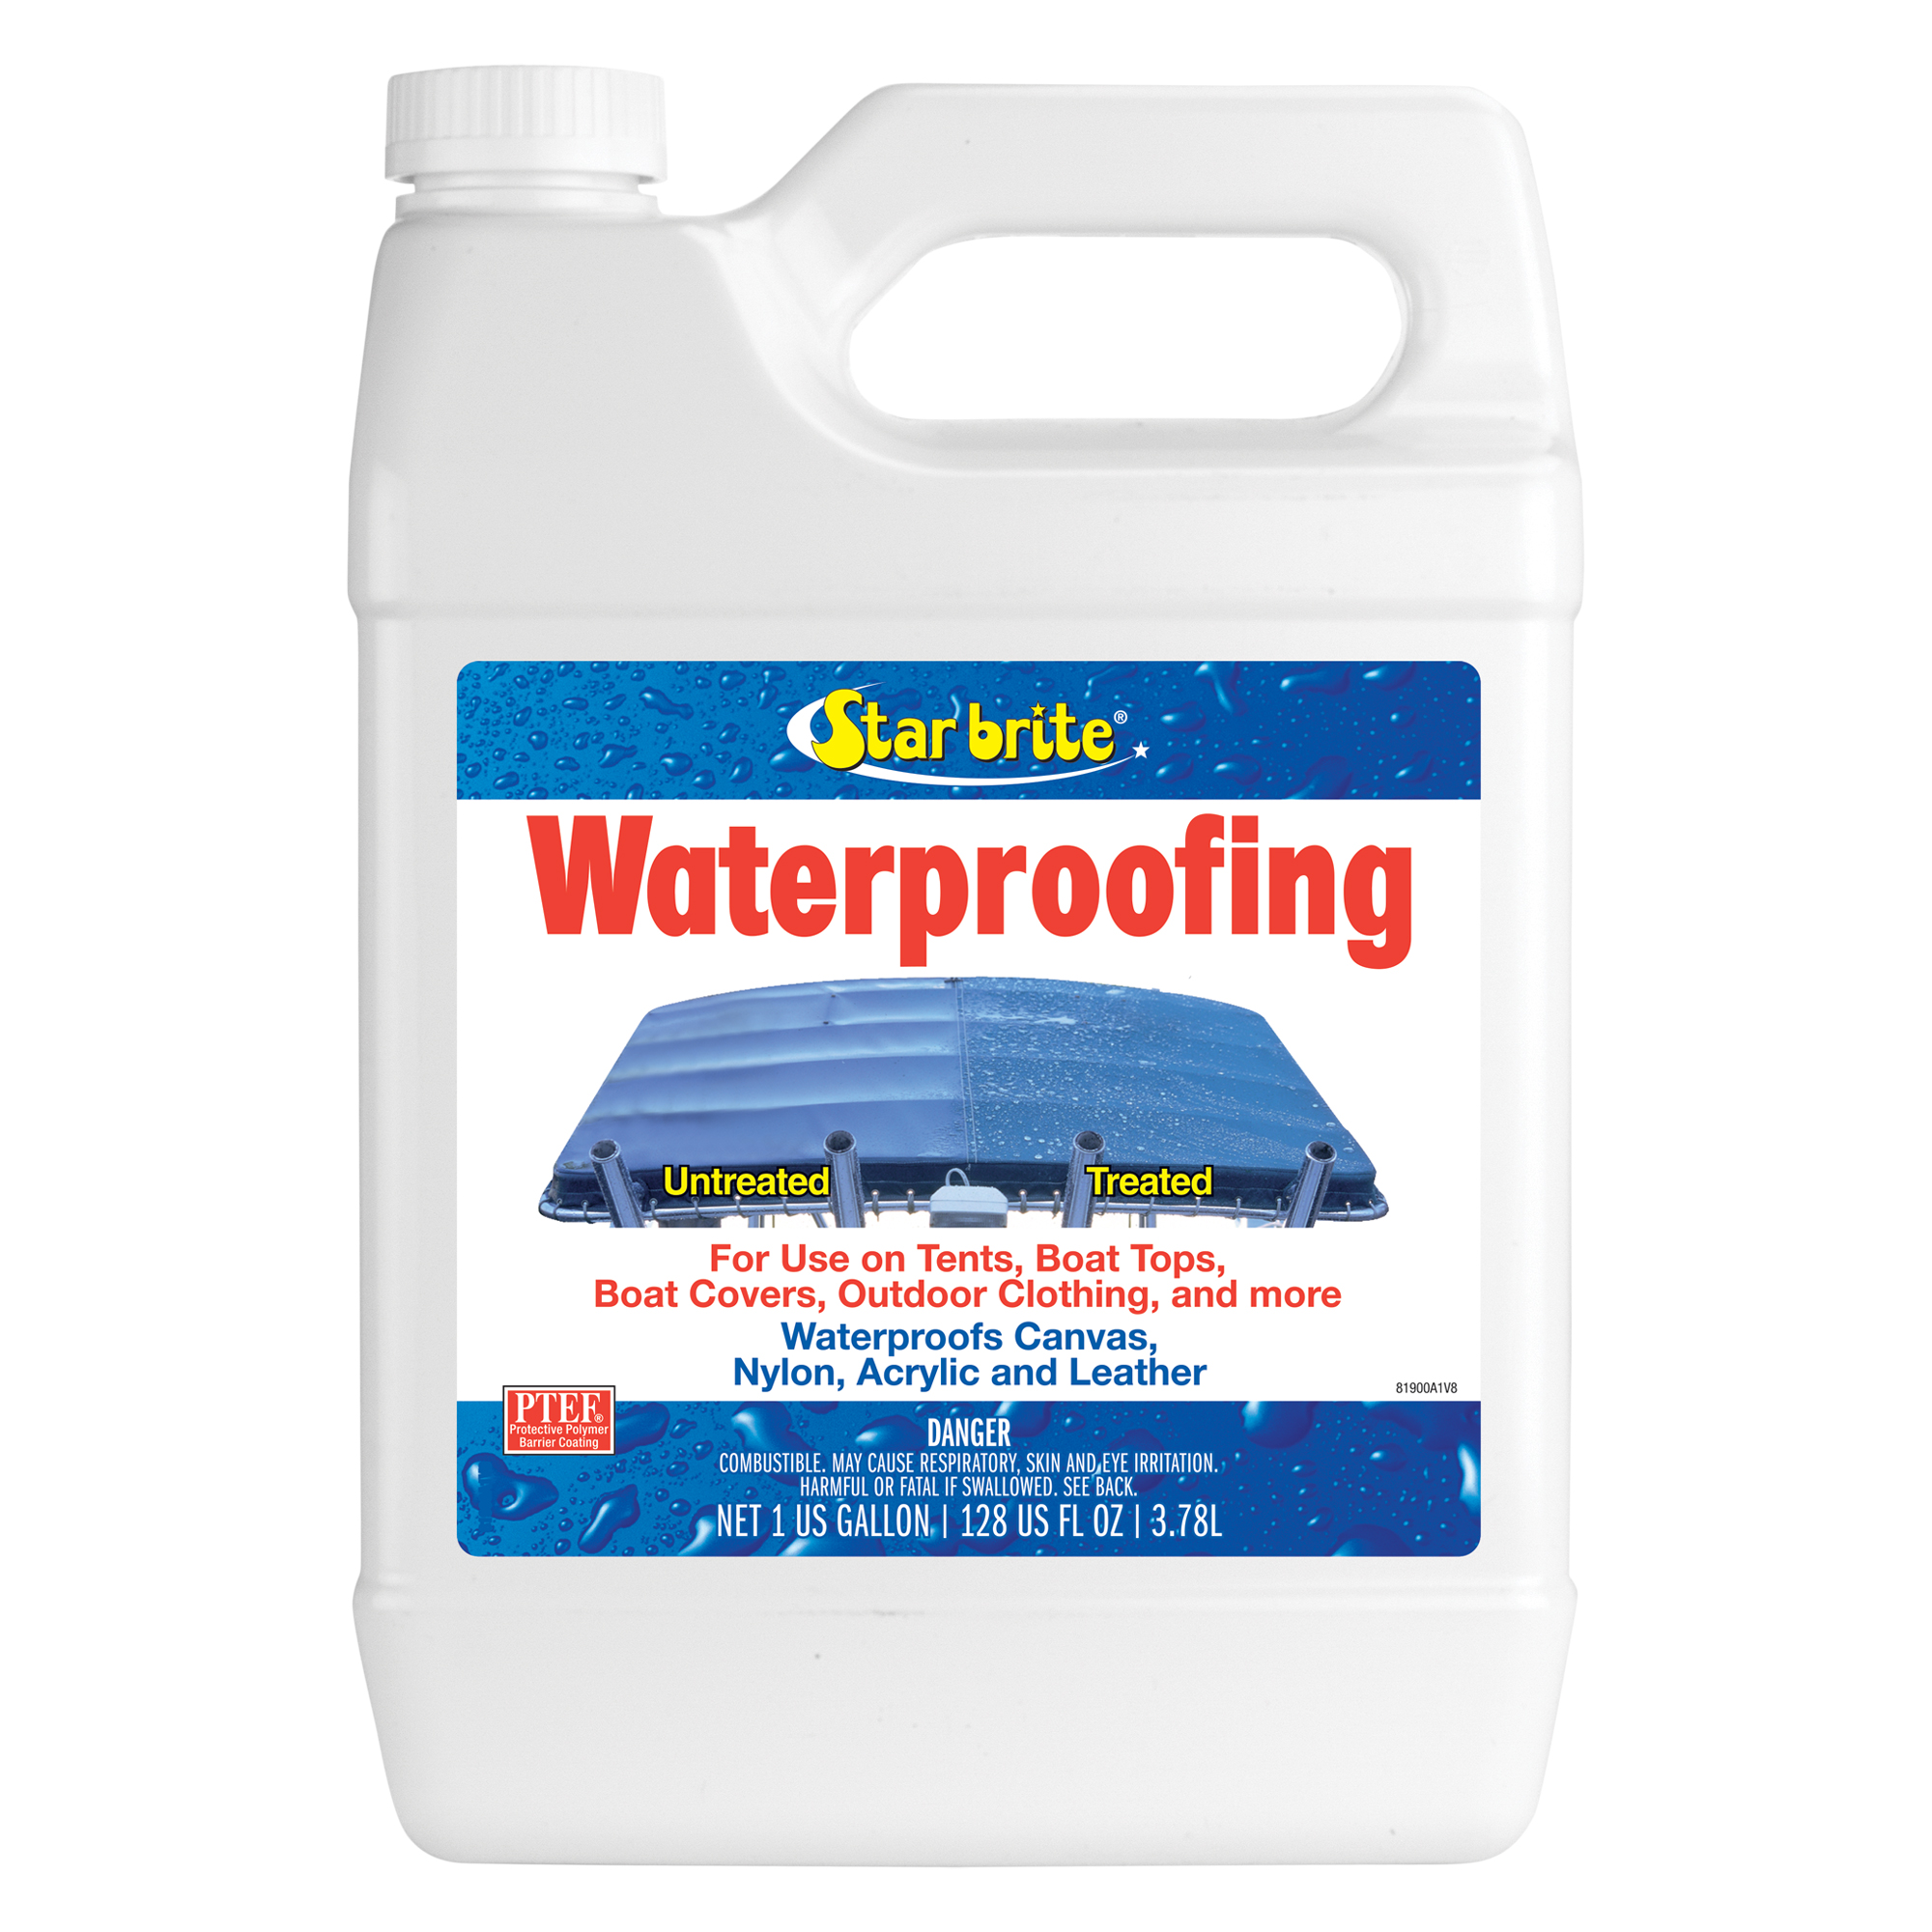 STAR BRITE Ultimate Waterproofing Spray - Waterproofer, Stain Repellent, UV  Protection for Boat Covers, Tents, Jackets & More - 1 Gallon (081900N)